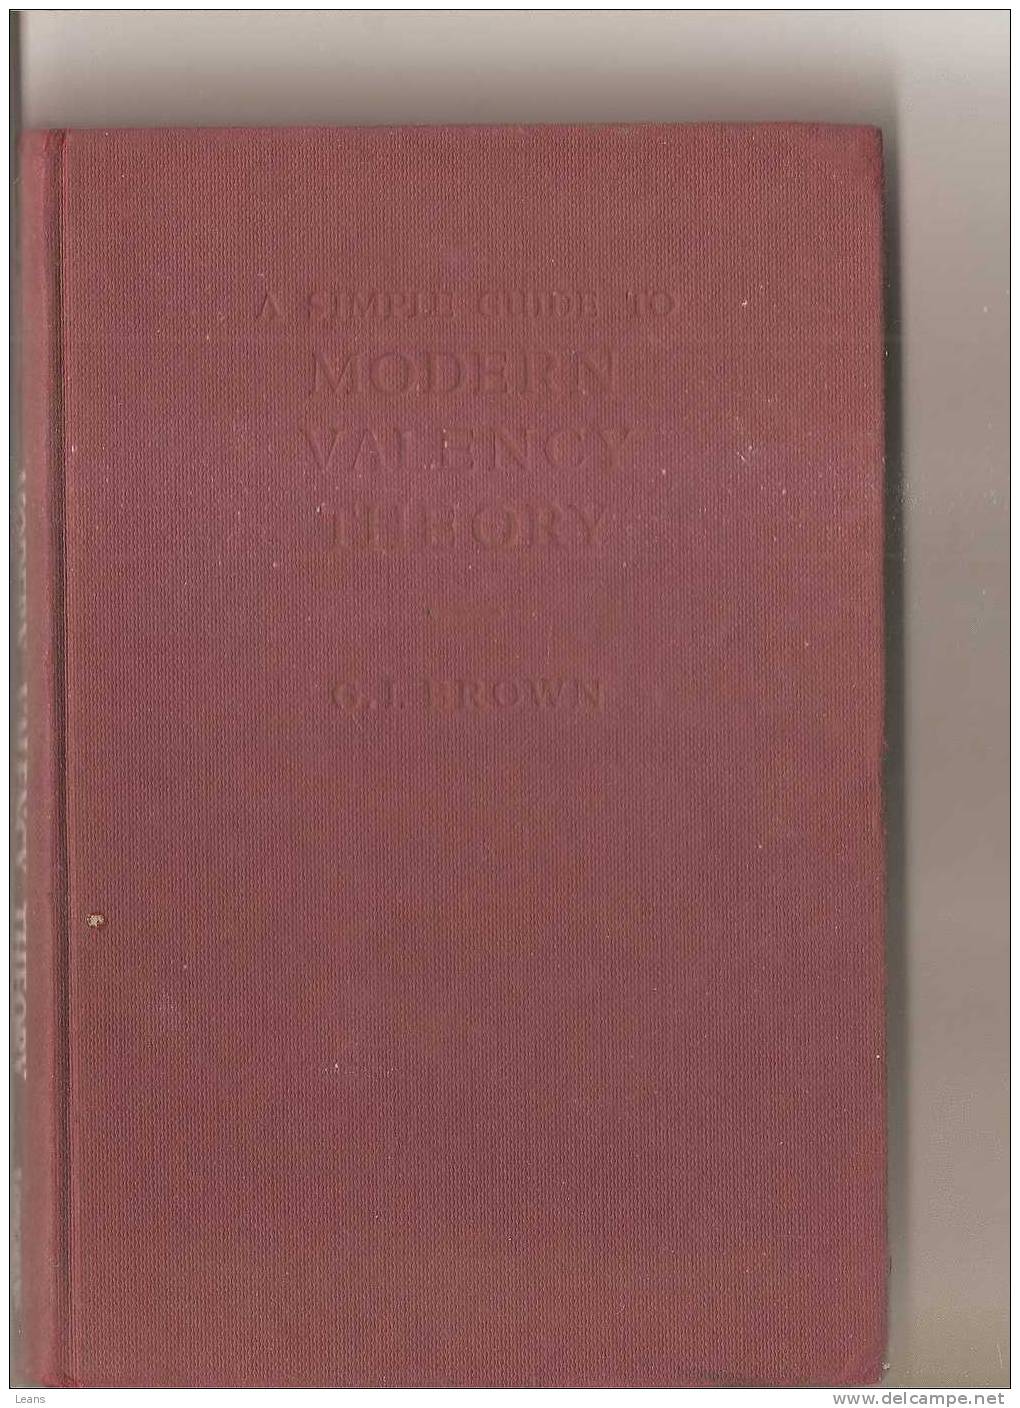 A SIMPLE GUIDE TO MODERN VALENCY THEORY    Ed: BROWN - Wissenschaften